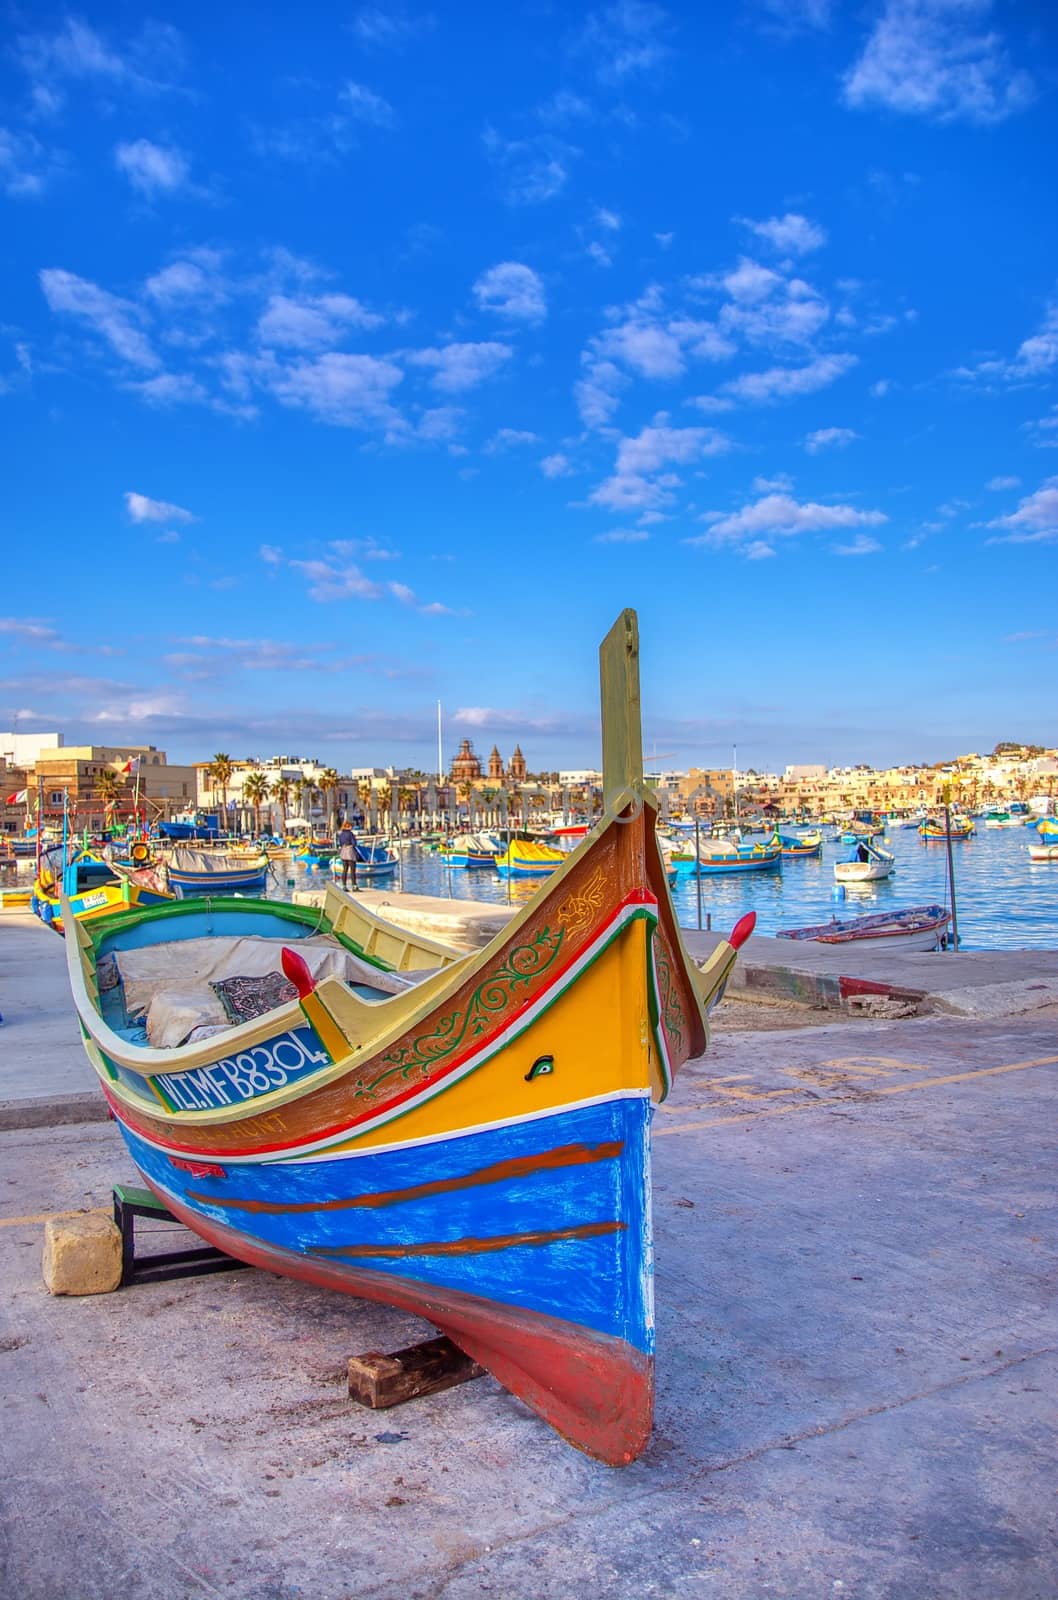 Beautiful view of the traditional eyed colorful boats Luzzu, Malta. by CreativePhotoSpain